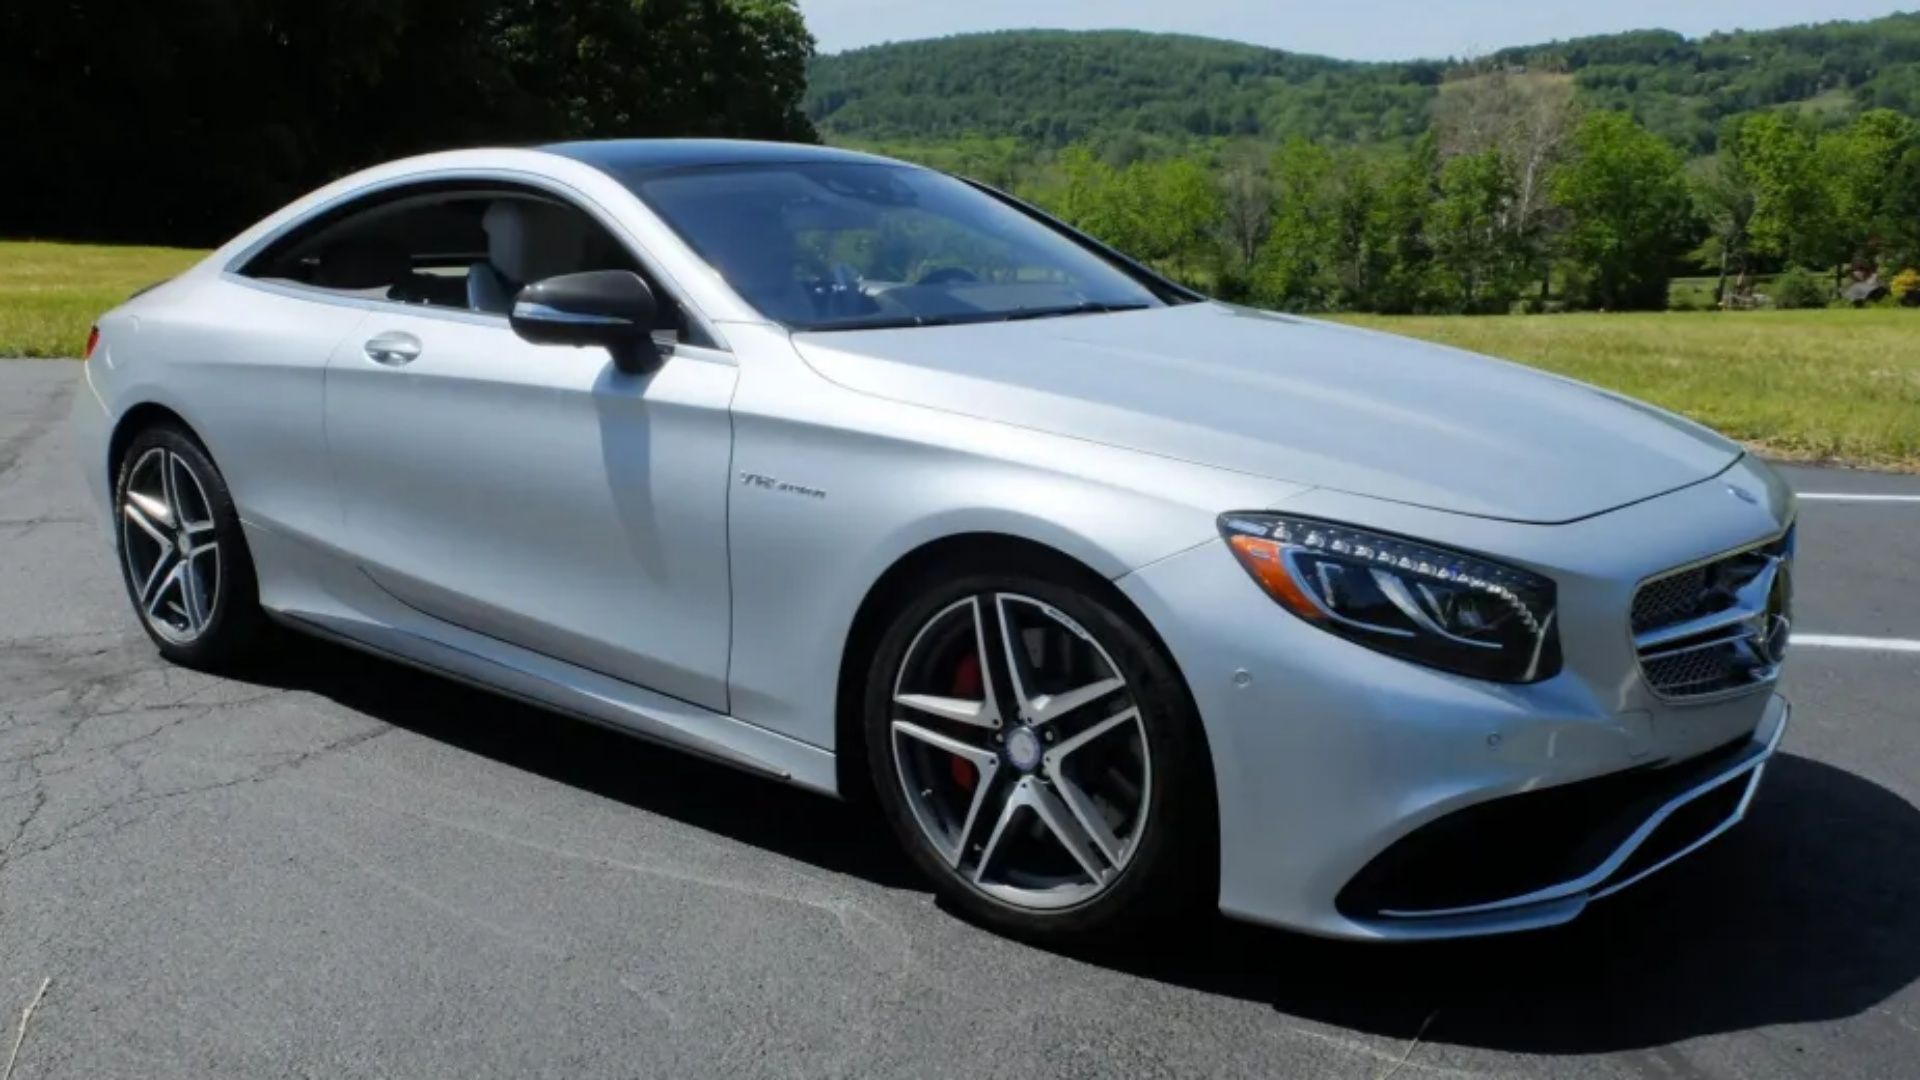 Image of a silver 2015 Mercedes-Benz S65 AMG